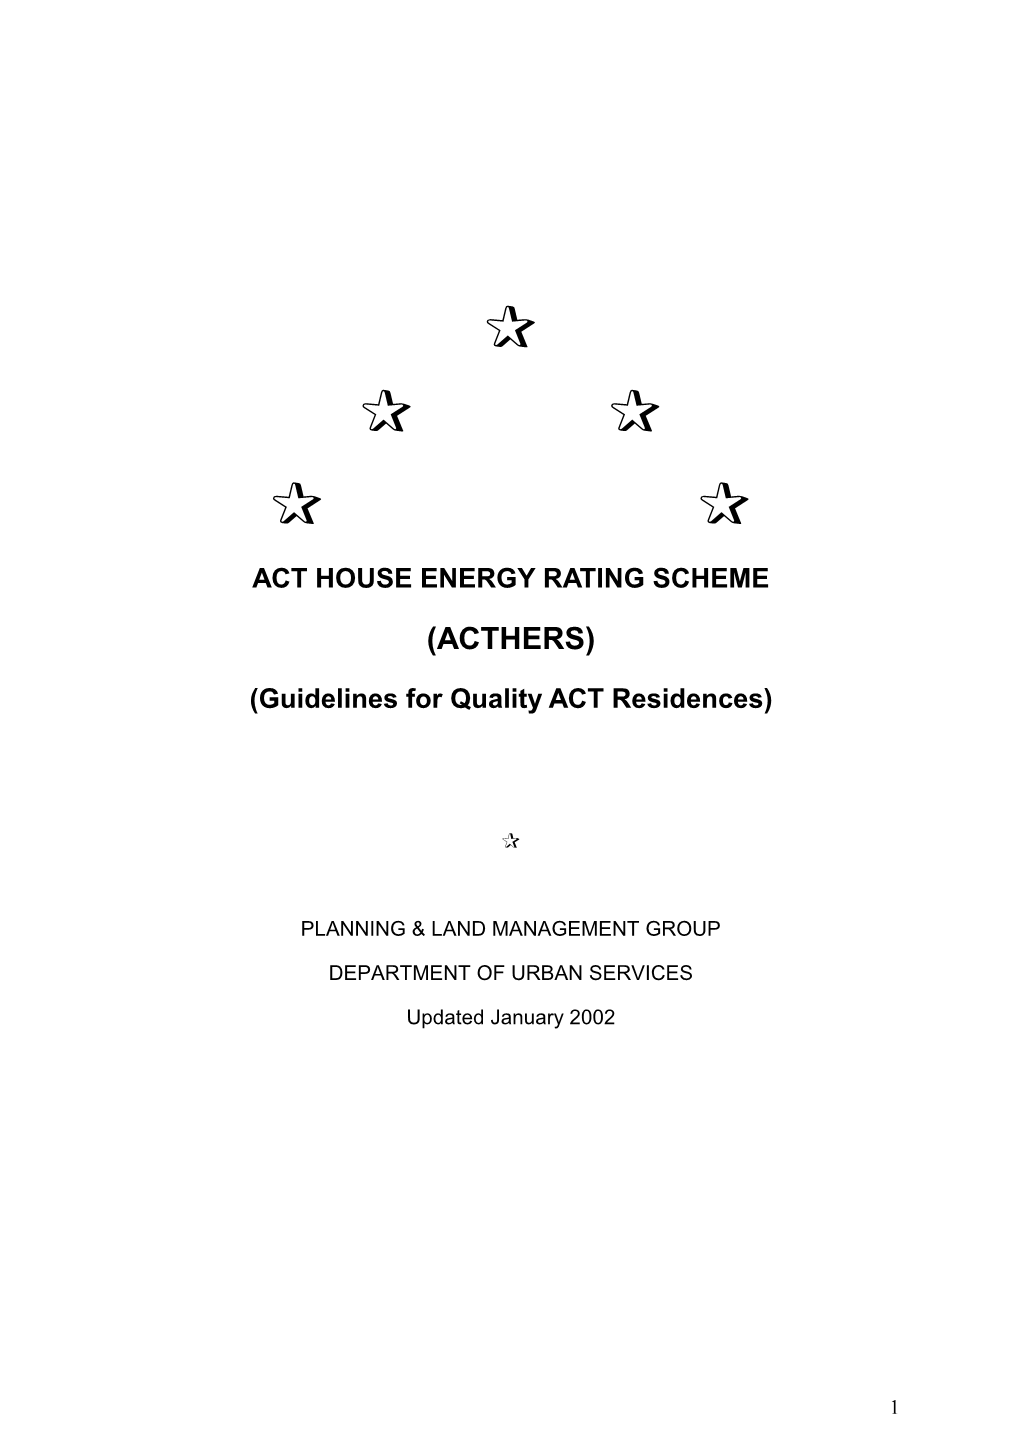 Act House Energy Rating Scheme